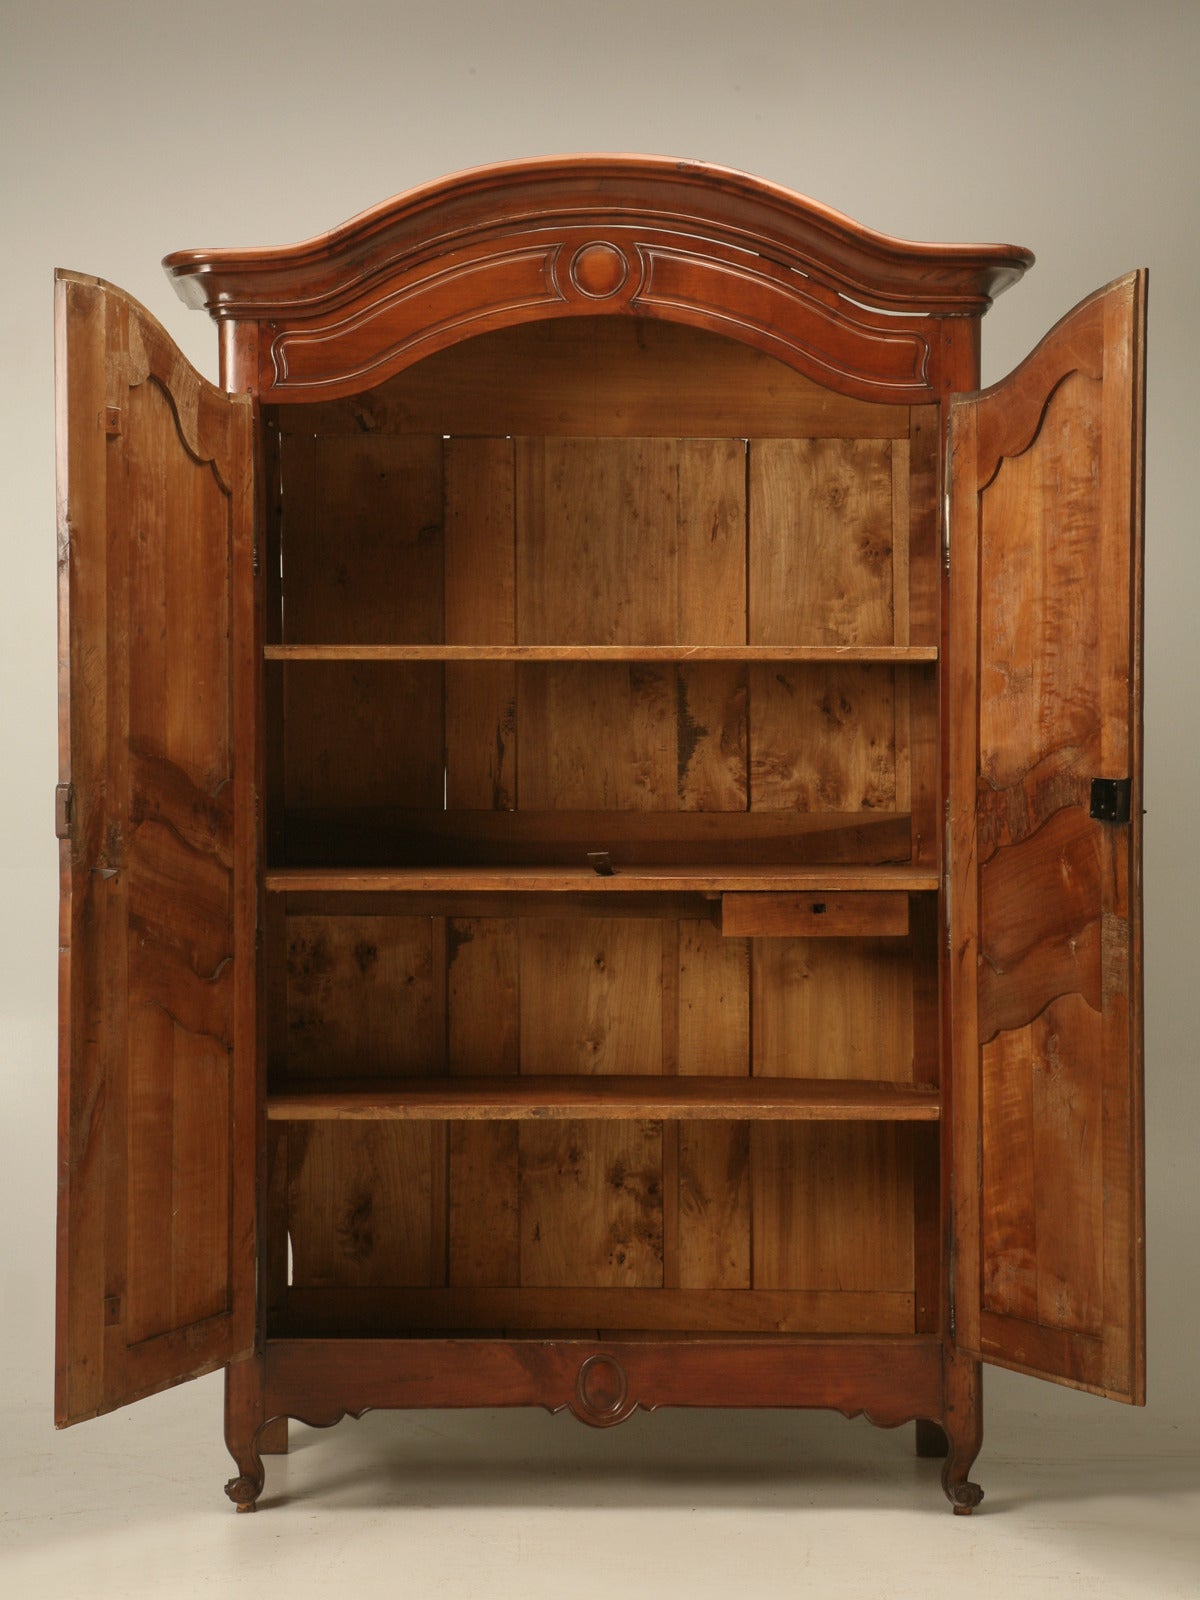 French Louis XV Style Armoire in Cherrywood, circa early 1800's Fully Restored 1